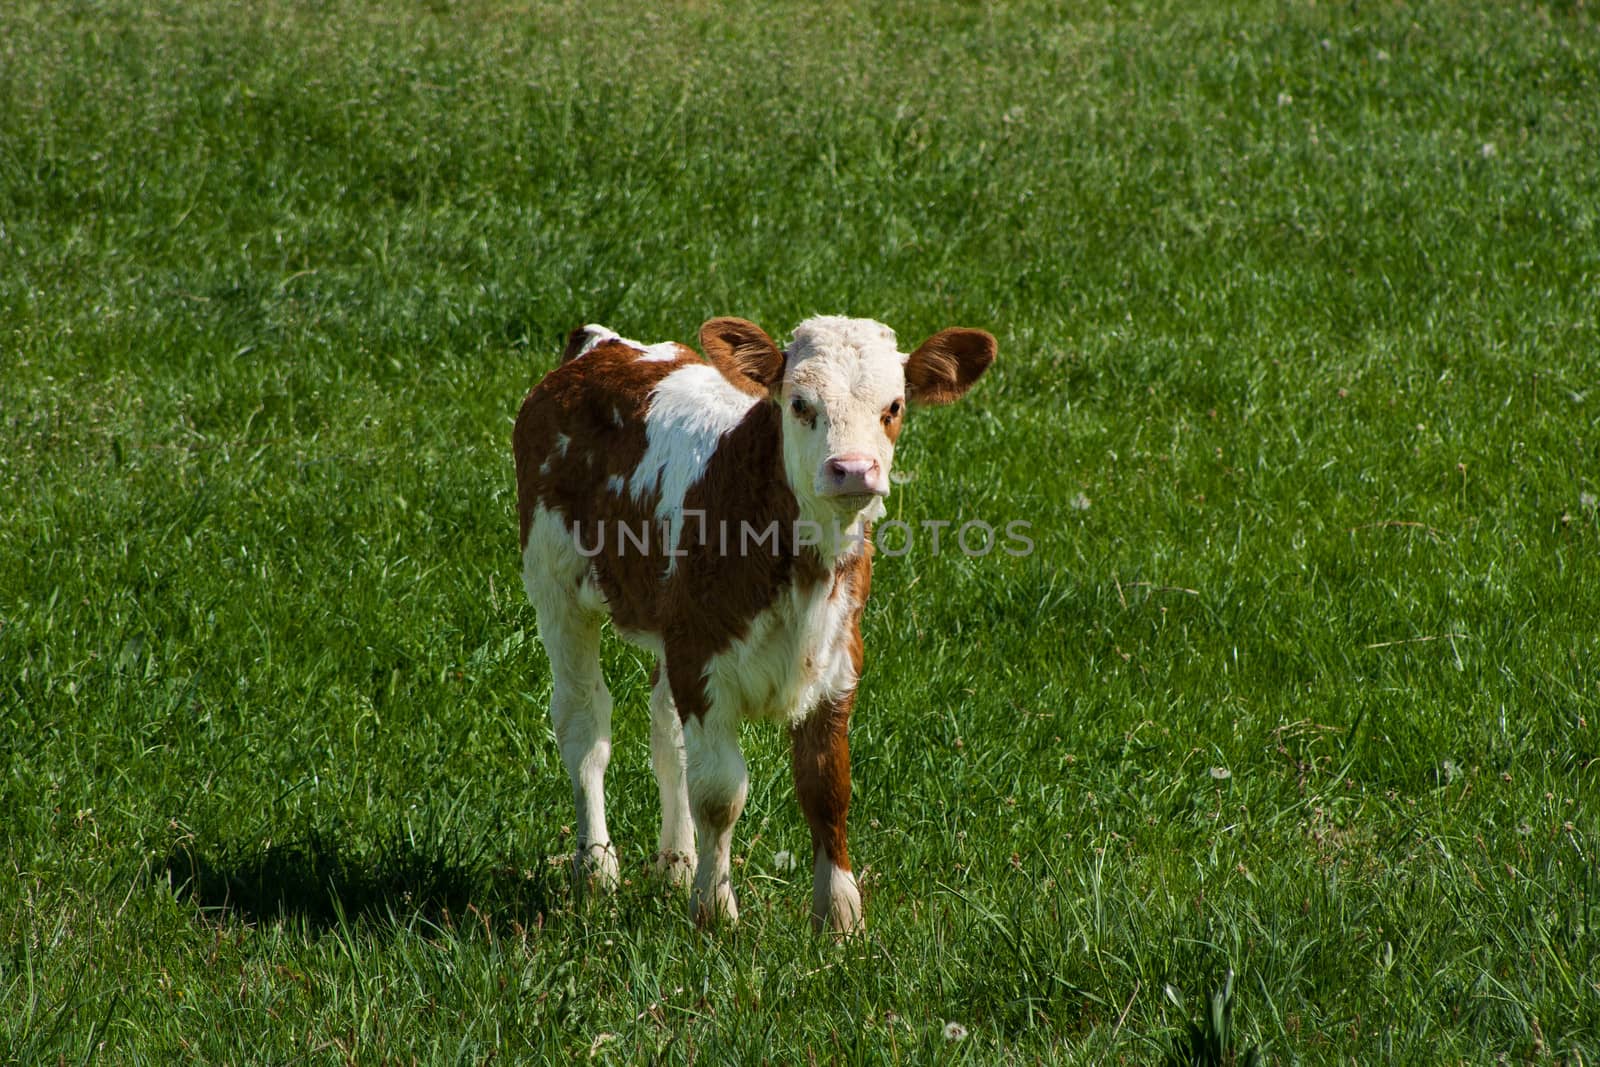 Photo of a cow standing in a field with hills.